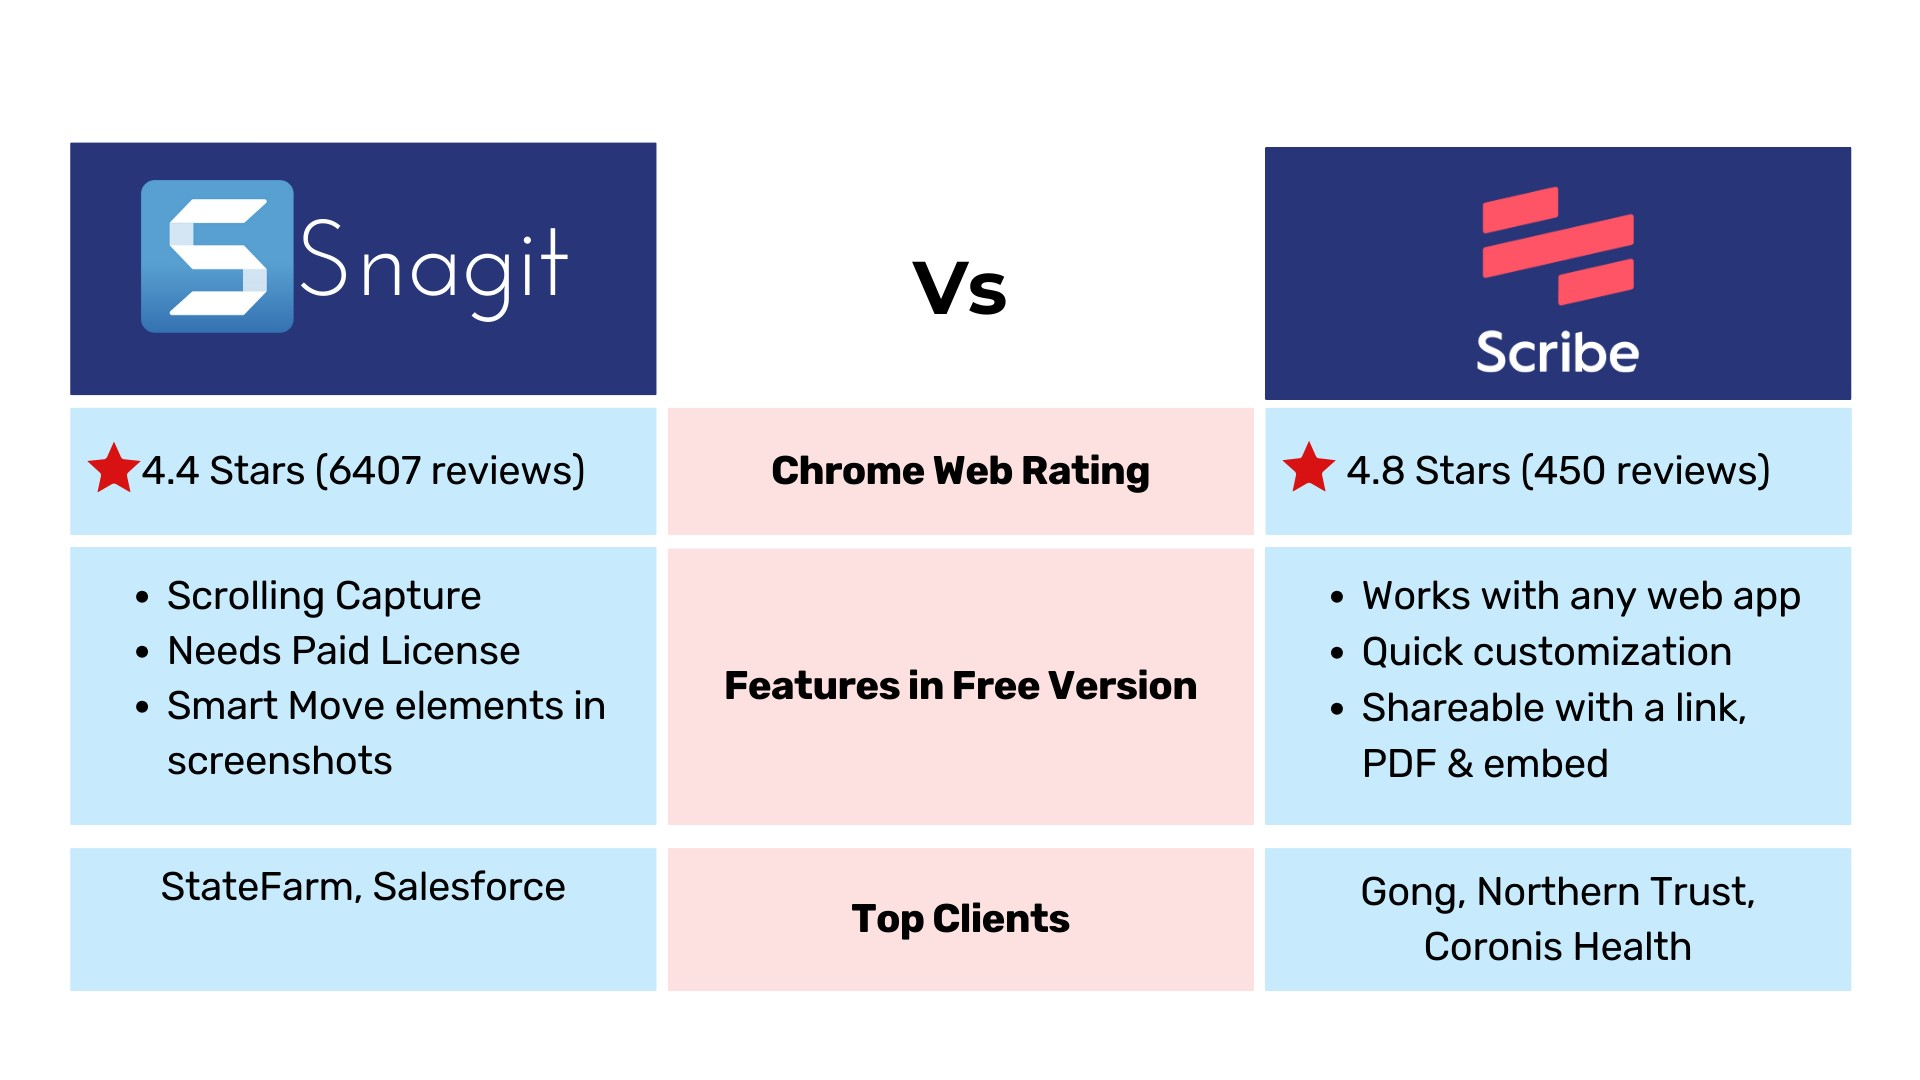 Snagit Vs Scribe comparison table with rating, features, top clients